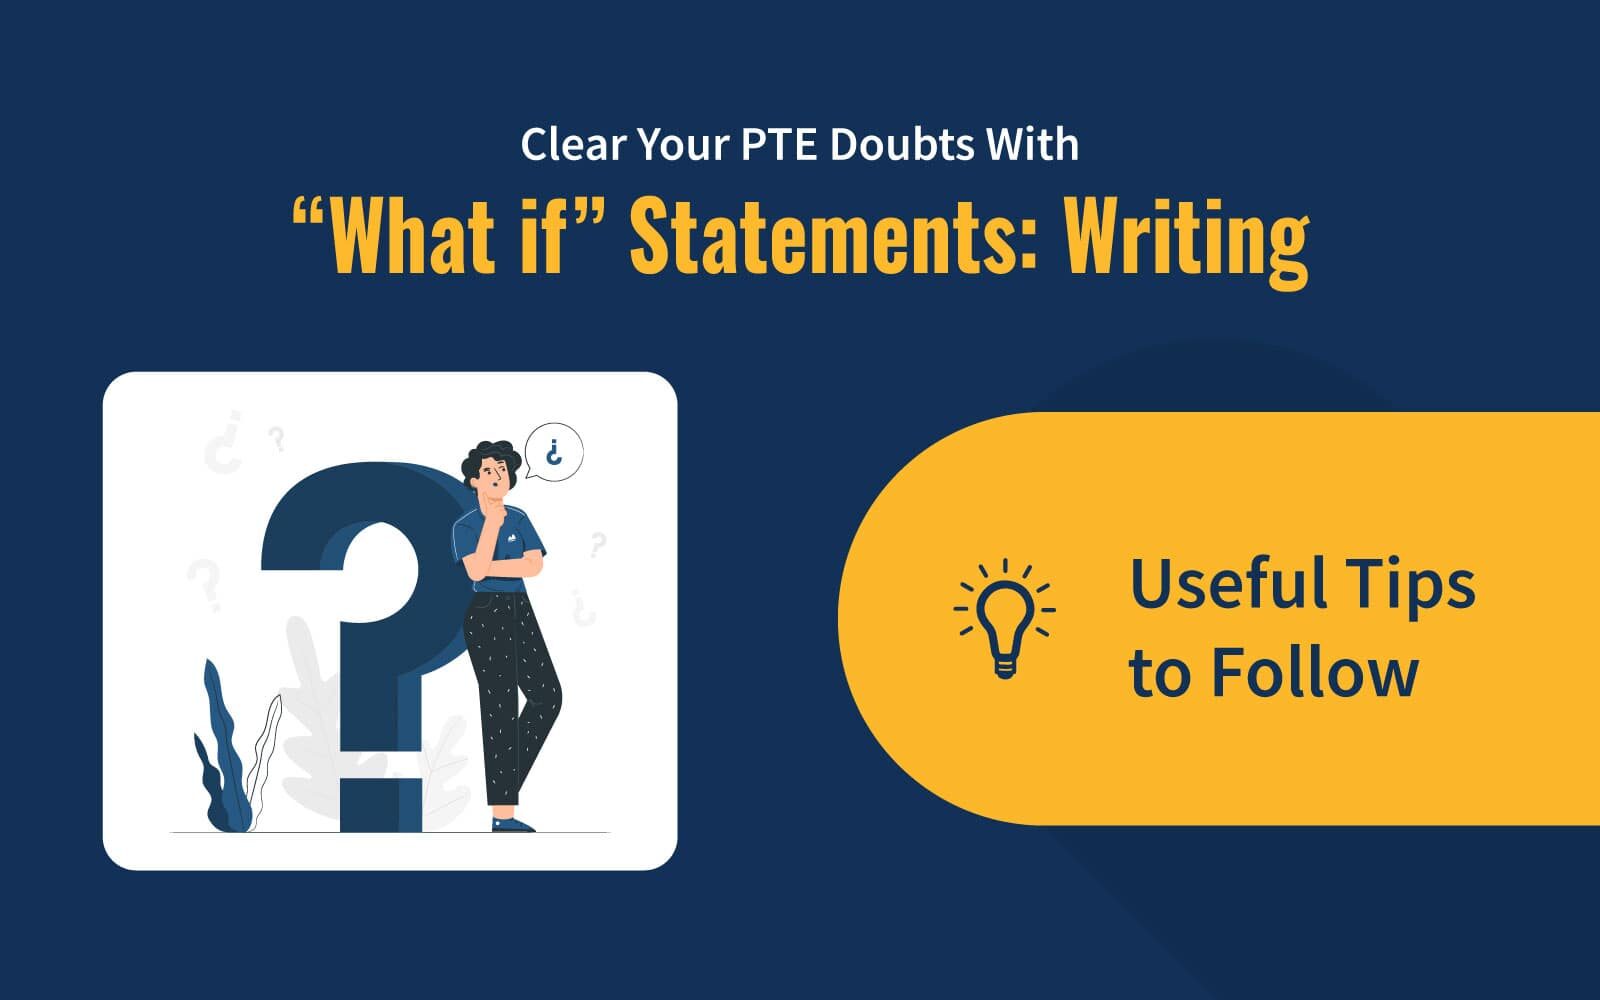 Clear Your PTE Doubts With “What if” Statements: Writing